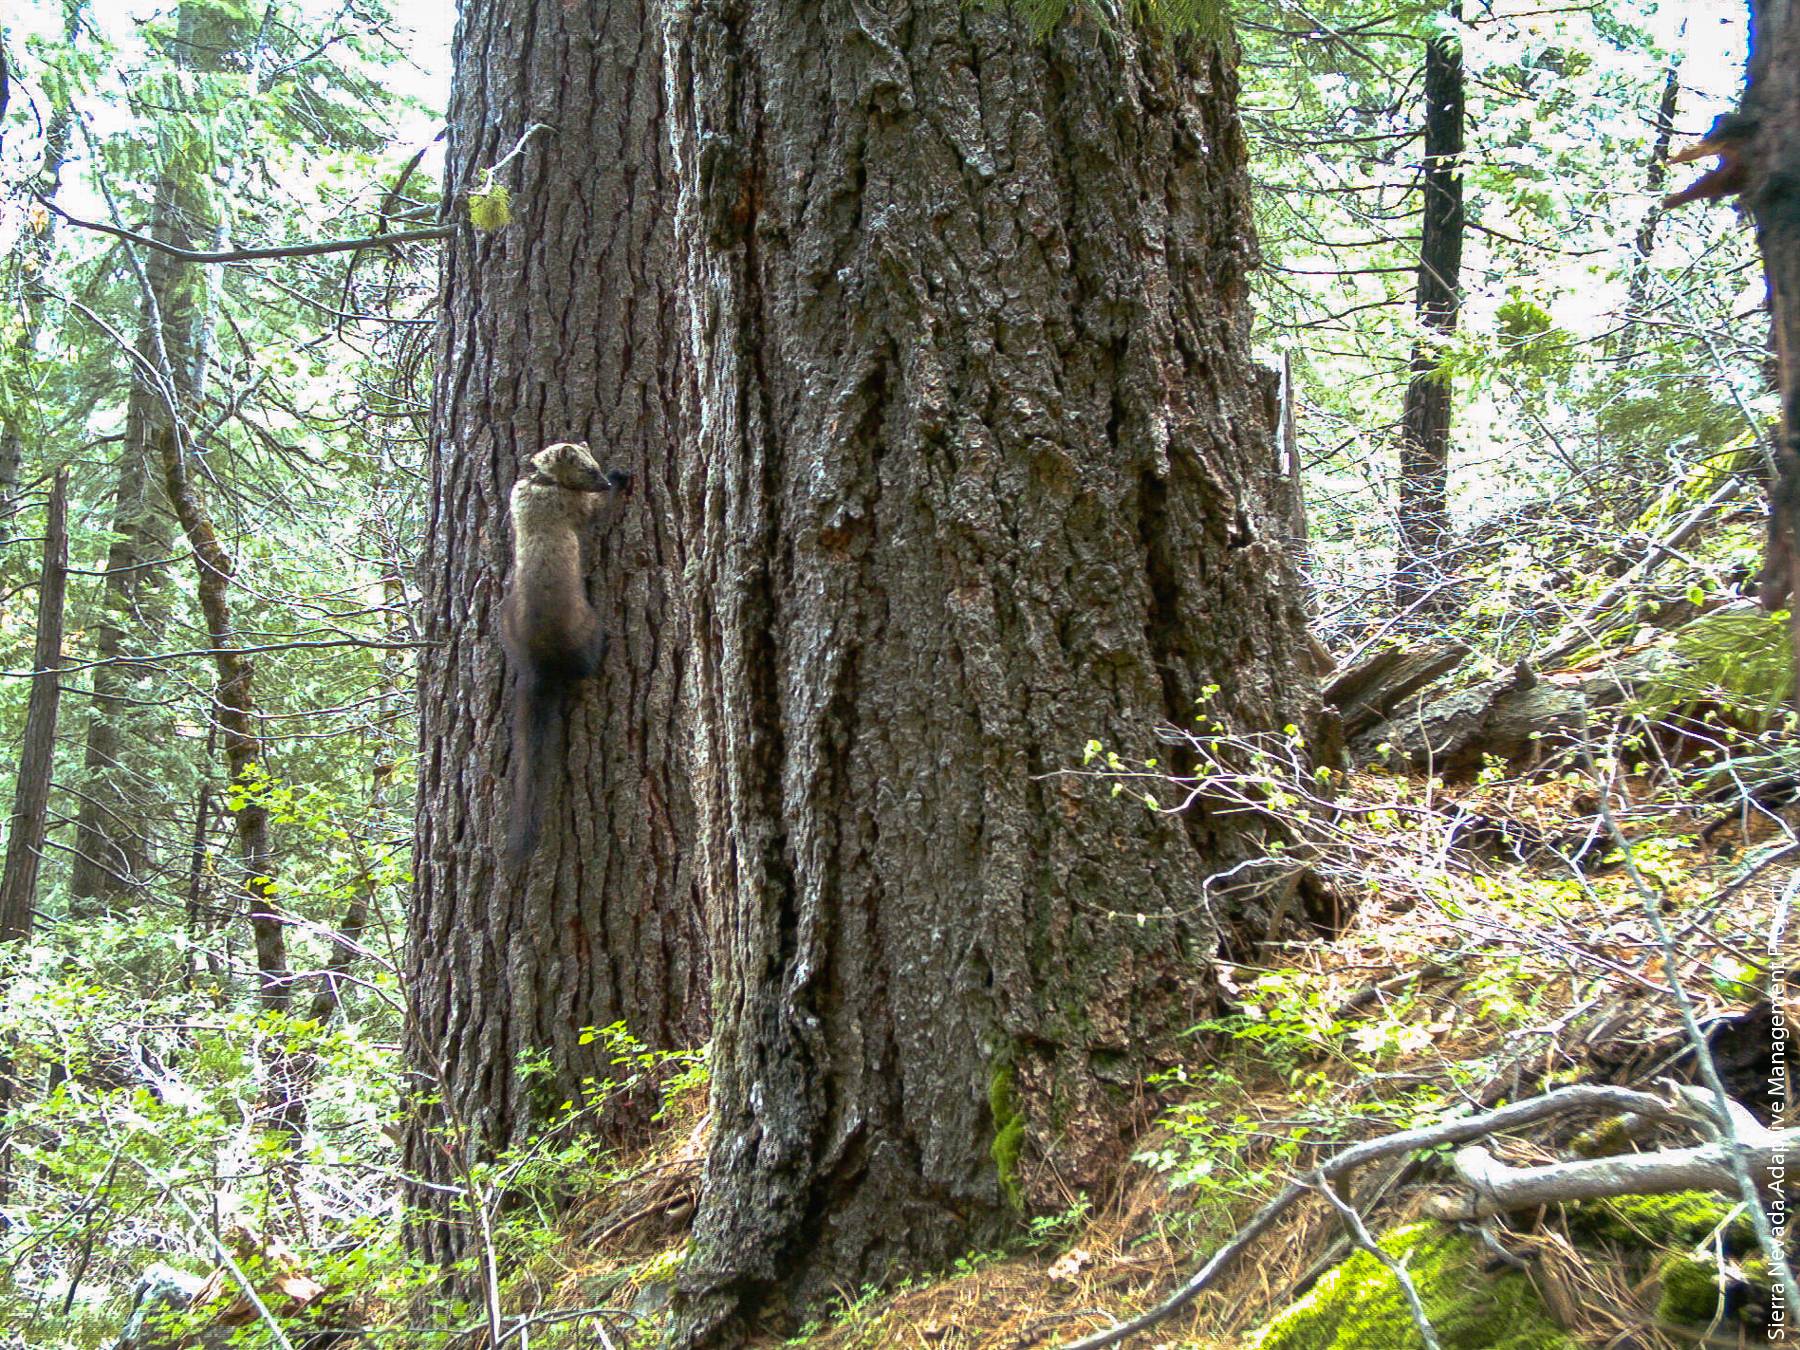 A Pacific fisher on a den tree. Several studies have used Lidar to identify habitat characteristics that are important for wildlife.